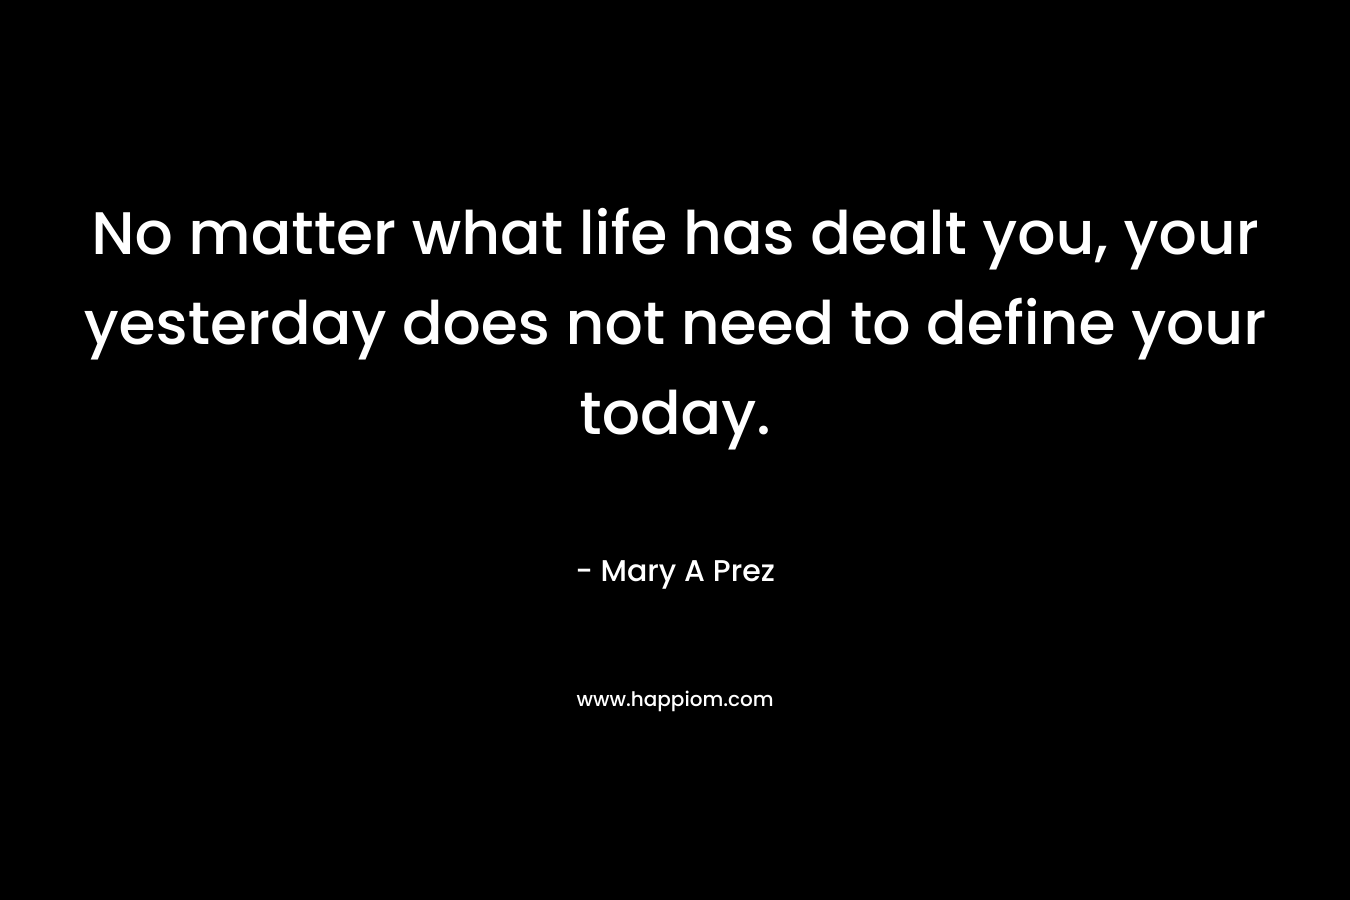 No matter what life has dealt you, your yesterday does not need to define your today. – Mary A Prez